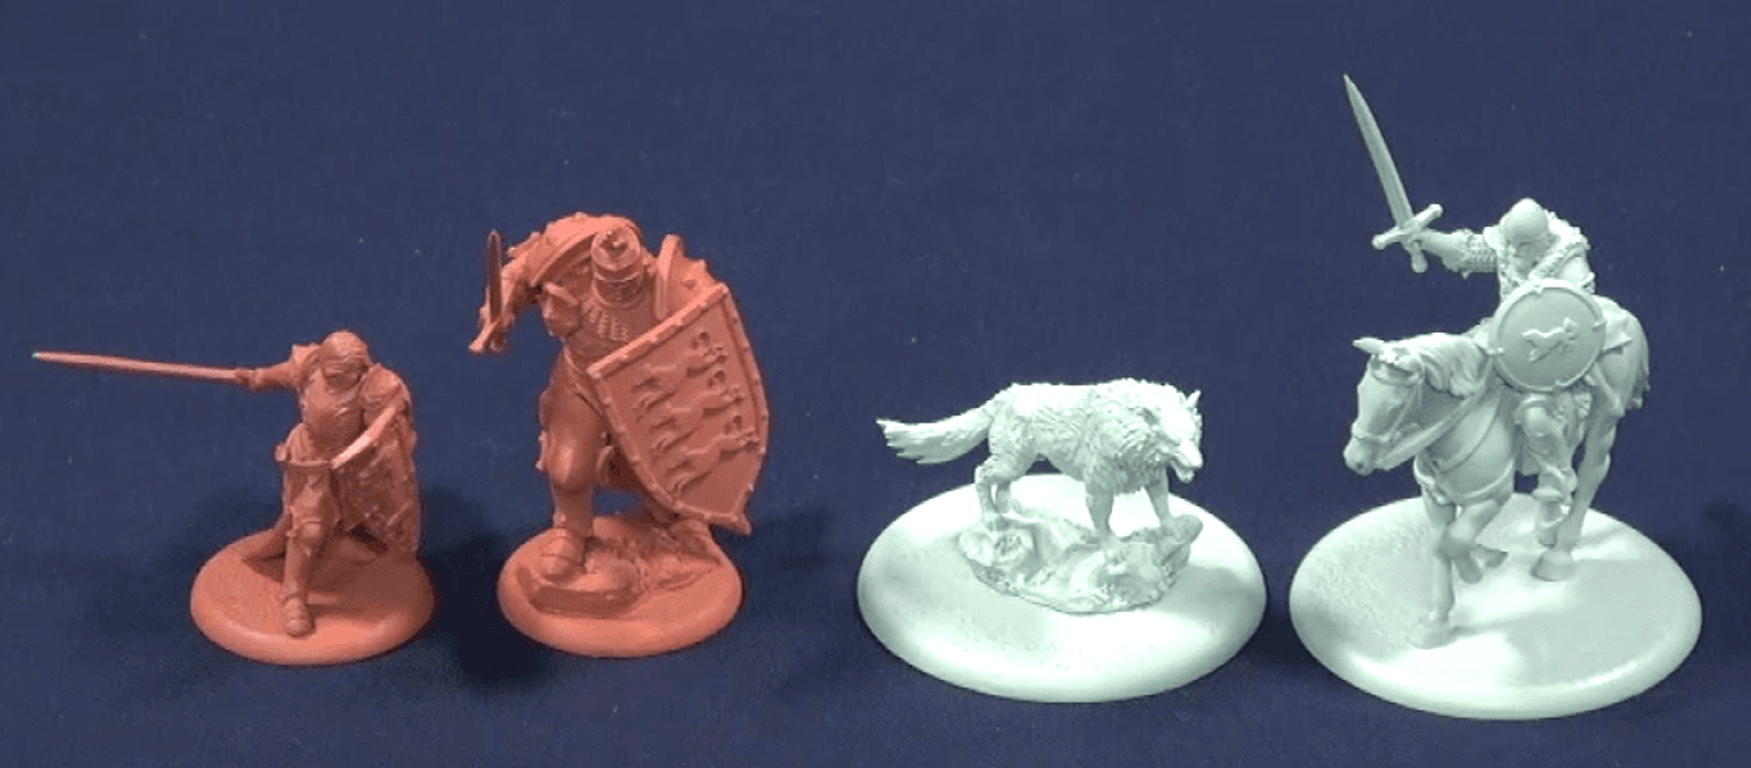 A Song of Ice & Fire: Tabletop Miniatures Game - Stark vs Lannister Starter Set miniature